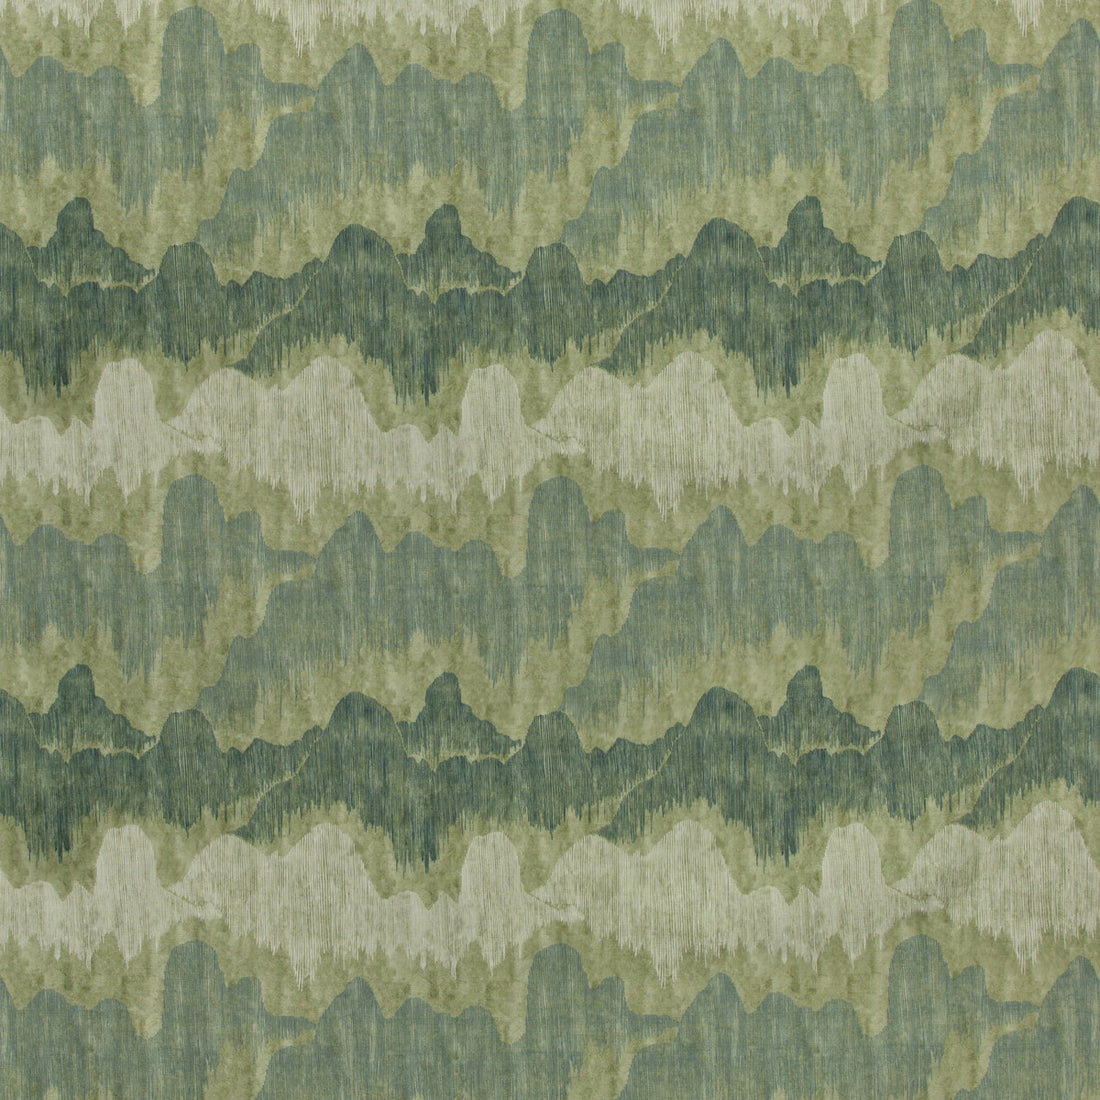 Cascadia fabric in jadestone color - pattern GWF-3755.313.0 - by Lee Jofa Modern in the Kelly Wearstler V collection